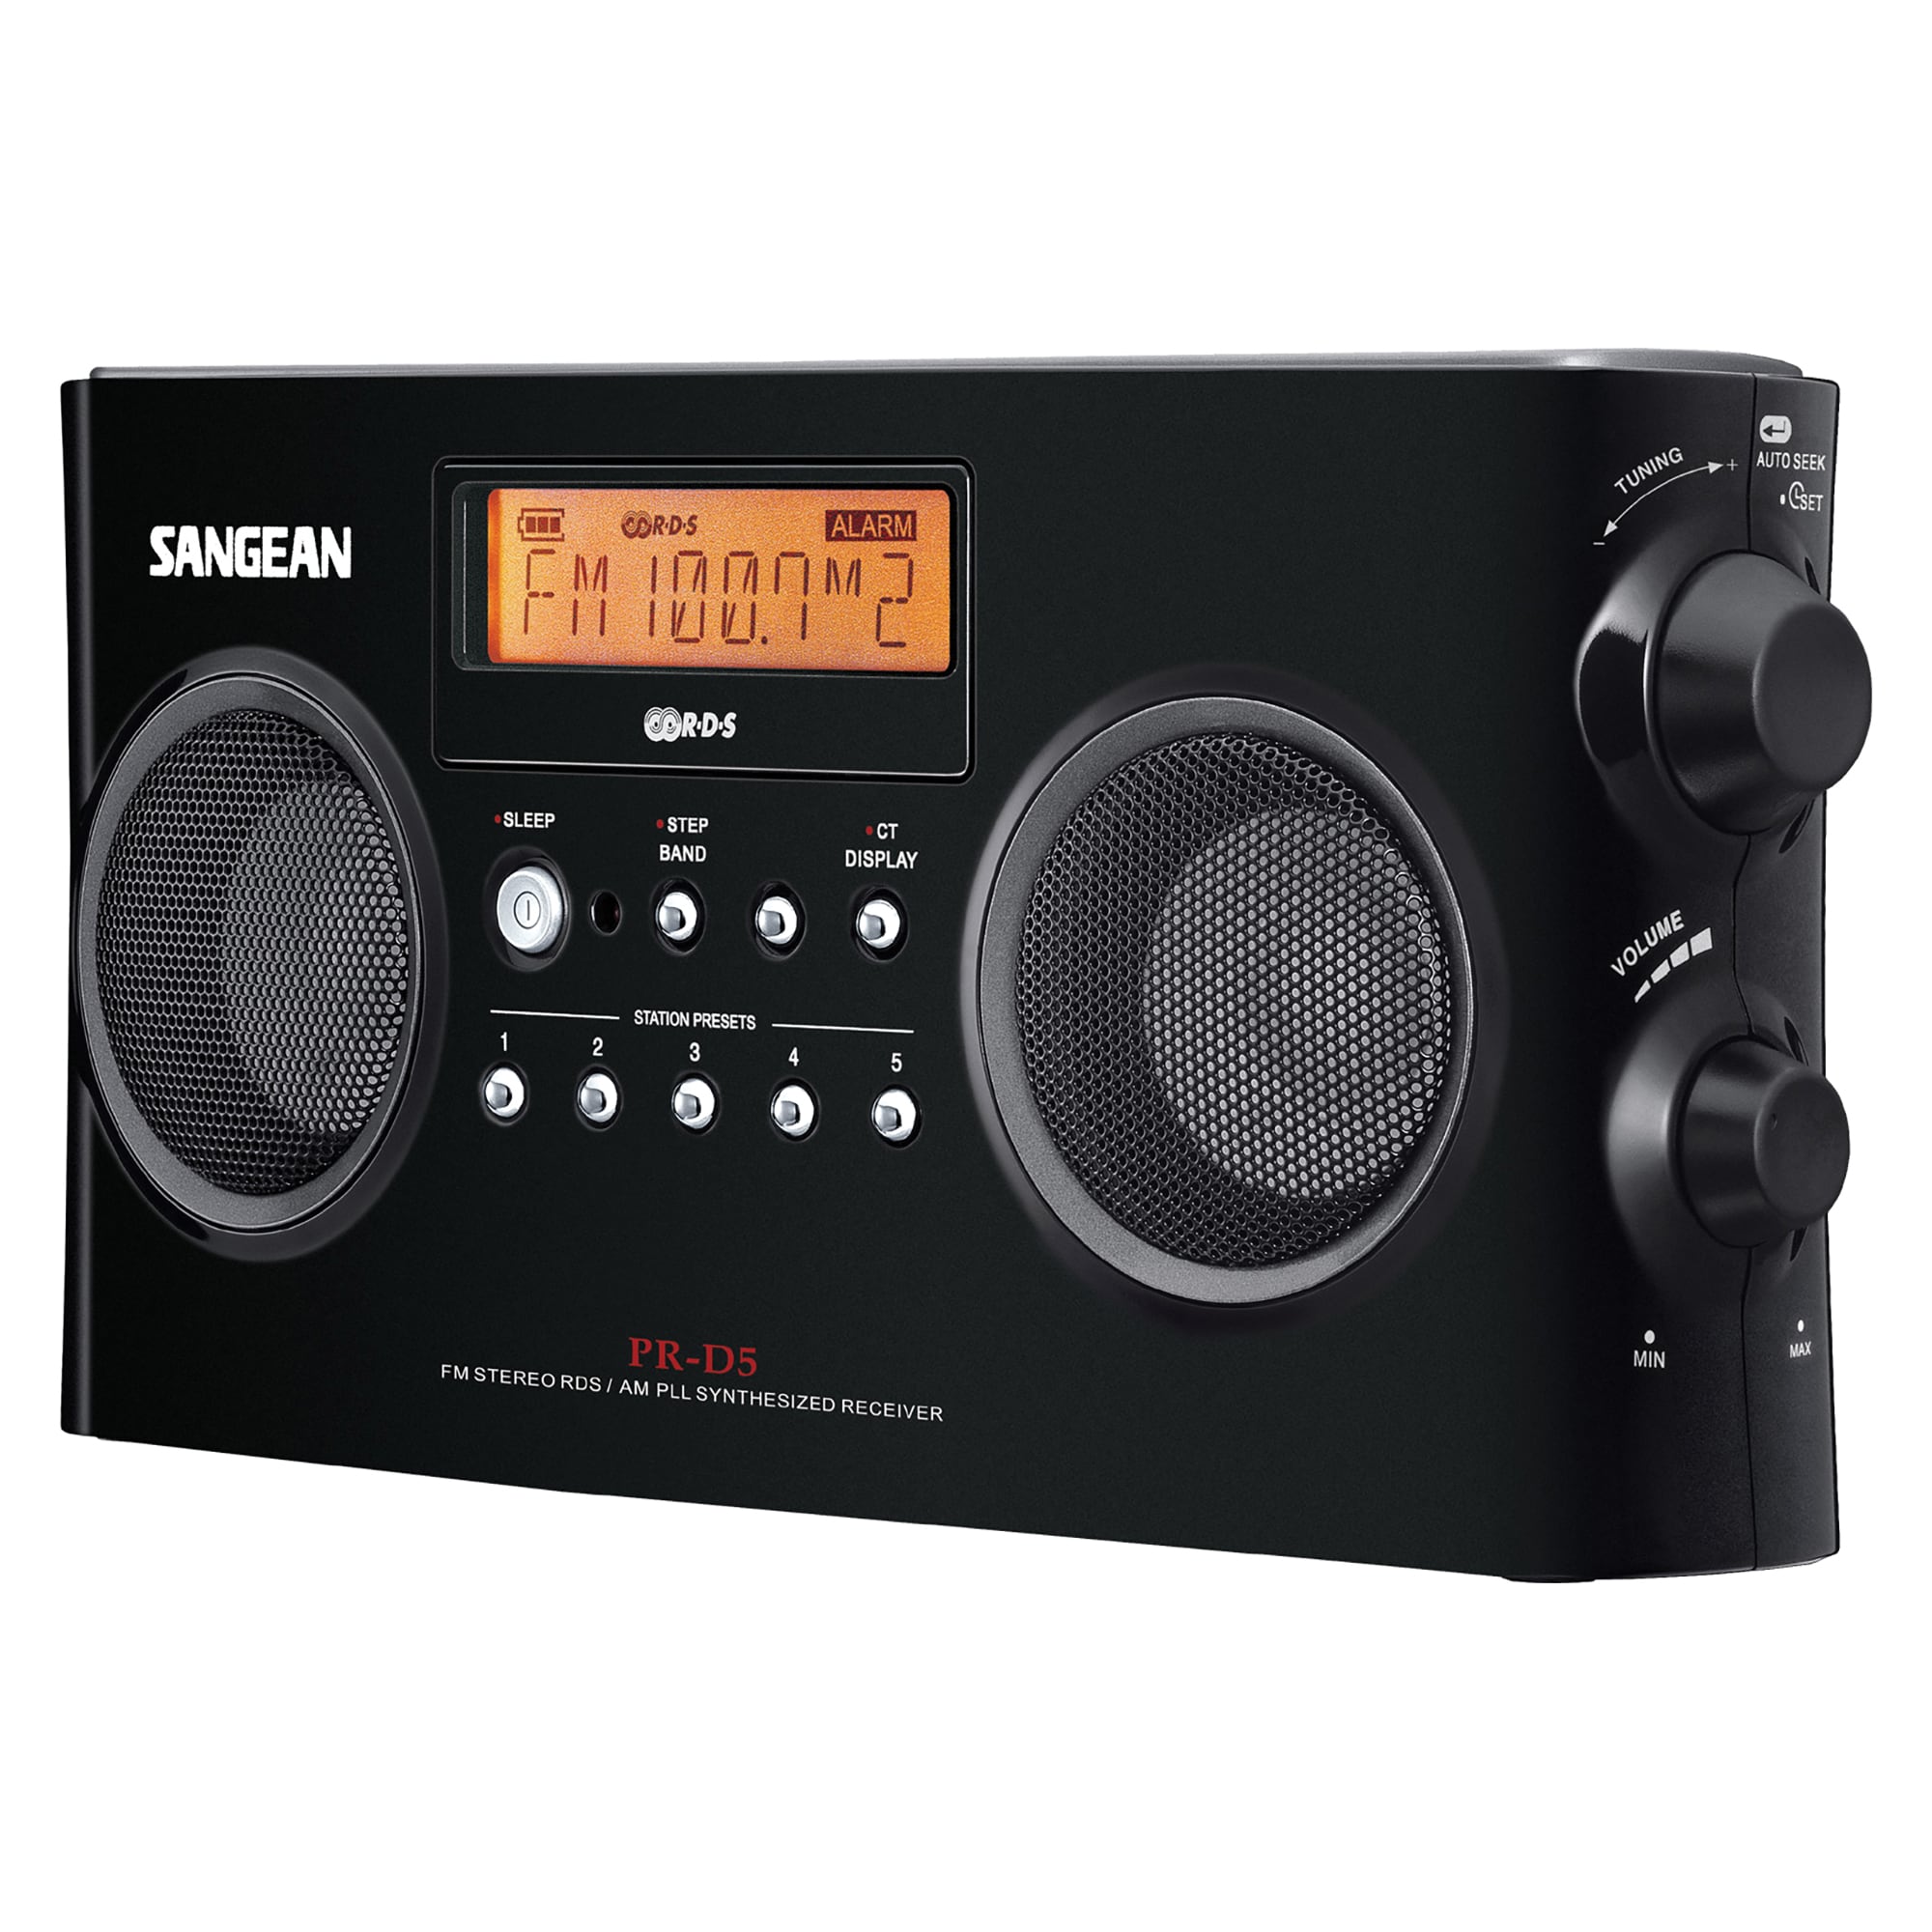 Sangean AM/FM HD Component Tuner  27% Off 5 Star Rating w/ Free S&H